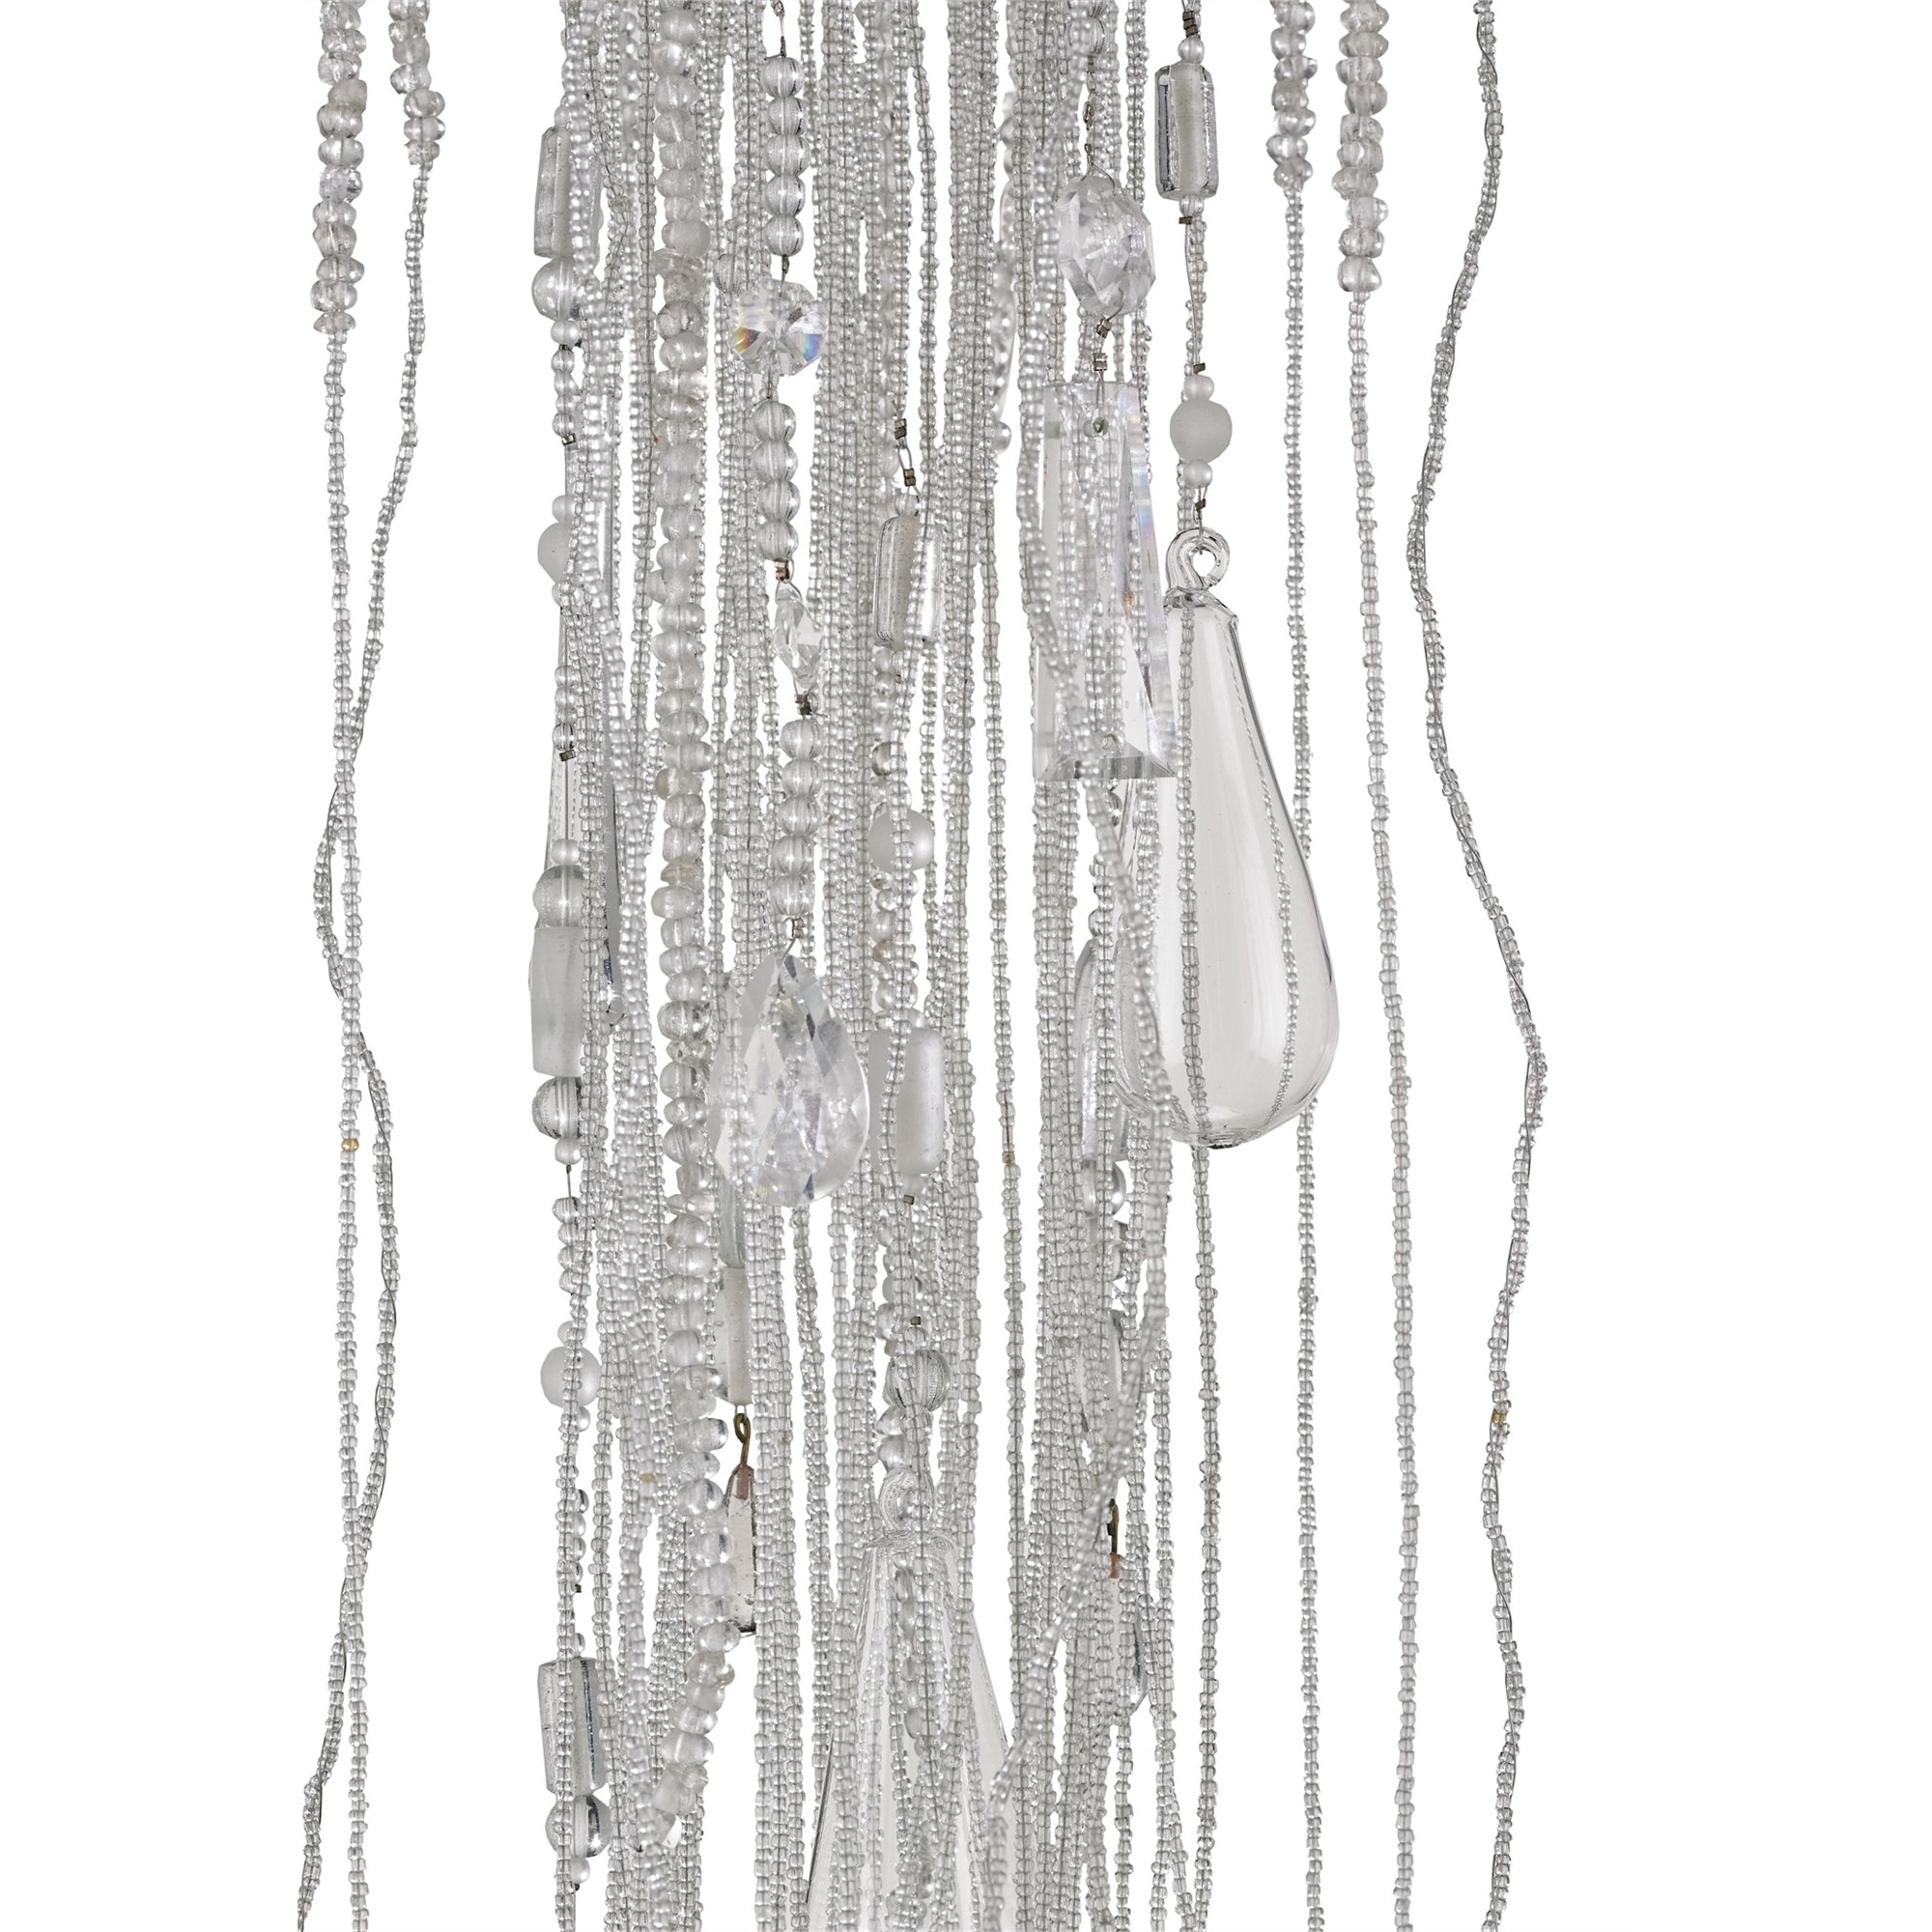 Detail view of clear glass beaded strands hanging from Medusa Light